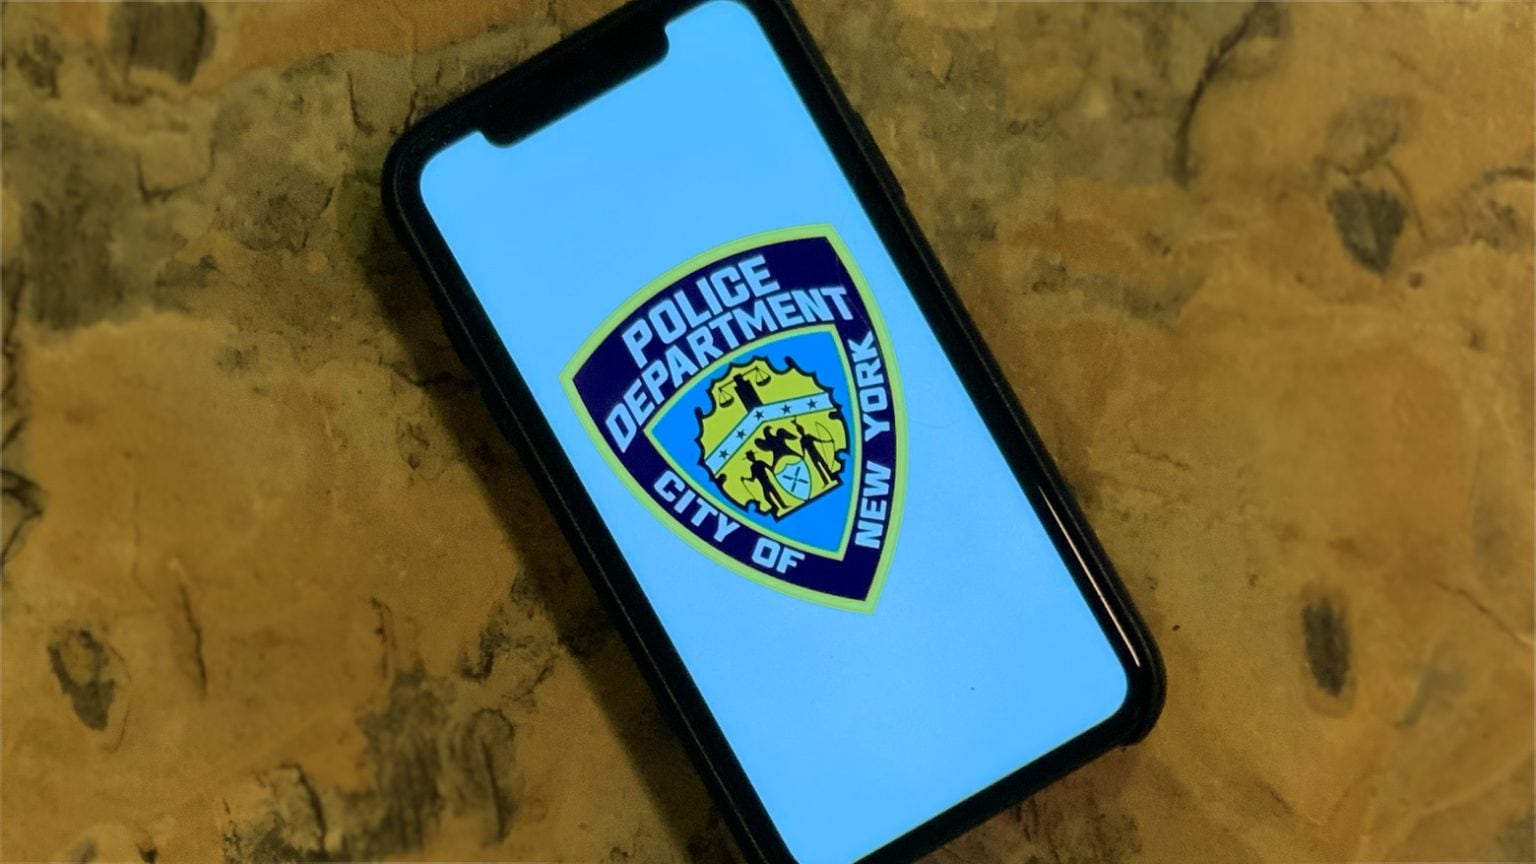 The NYPD already issues police officers iPhones.